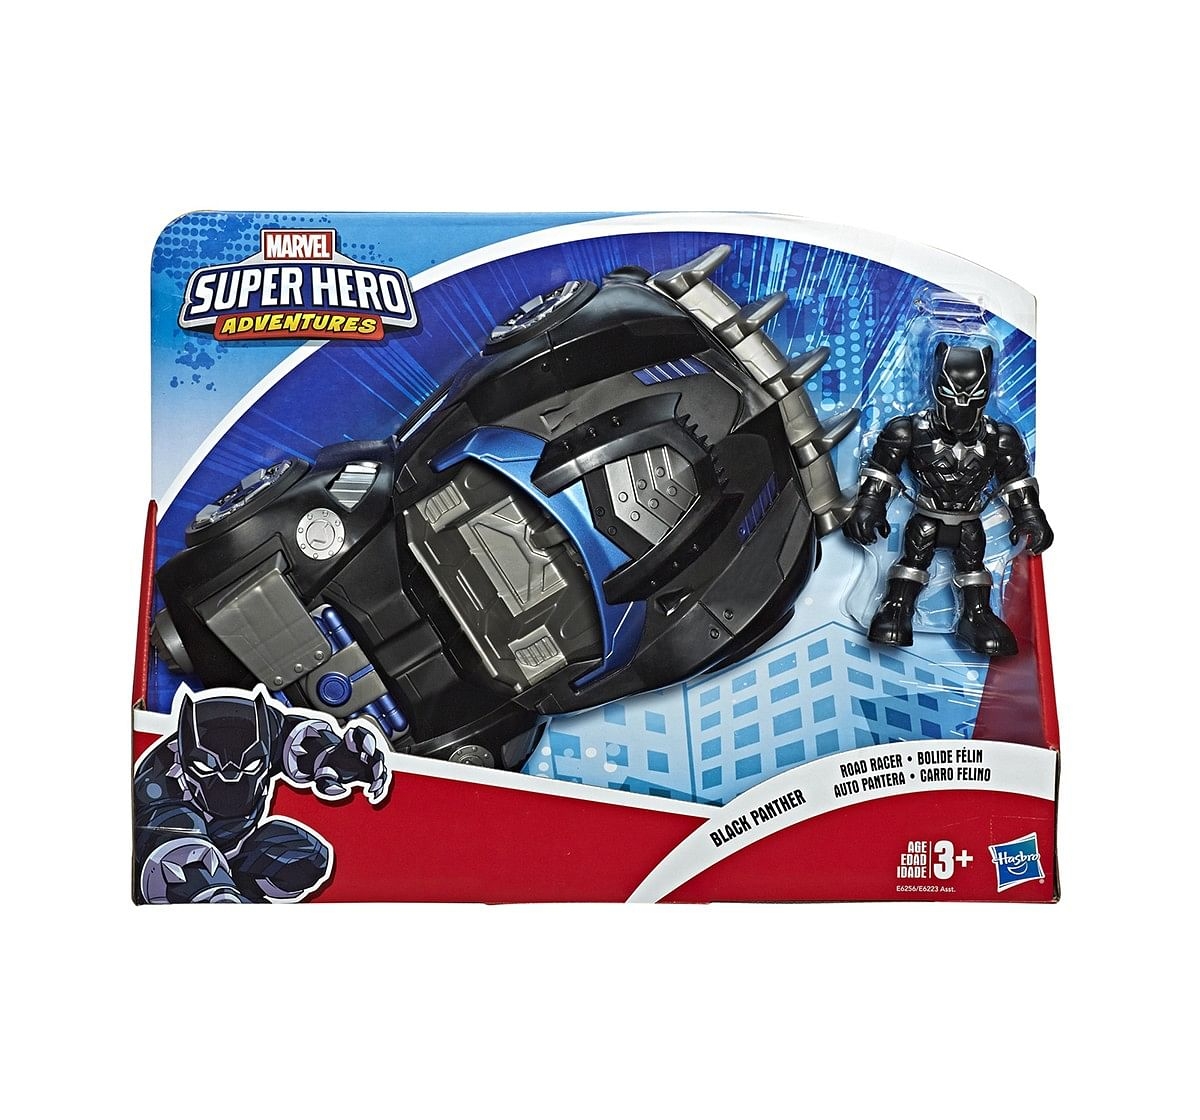 Superhero Adventure Black Panther Road Racer Assorted Activity Toys for Boys age 3Y+ (Black)